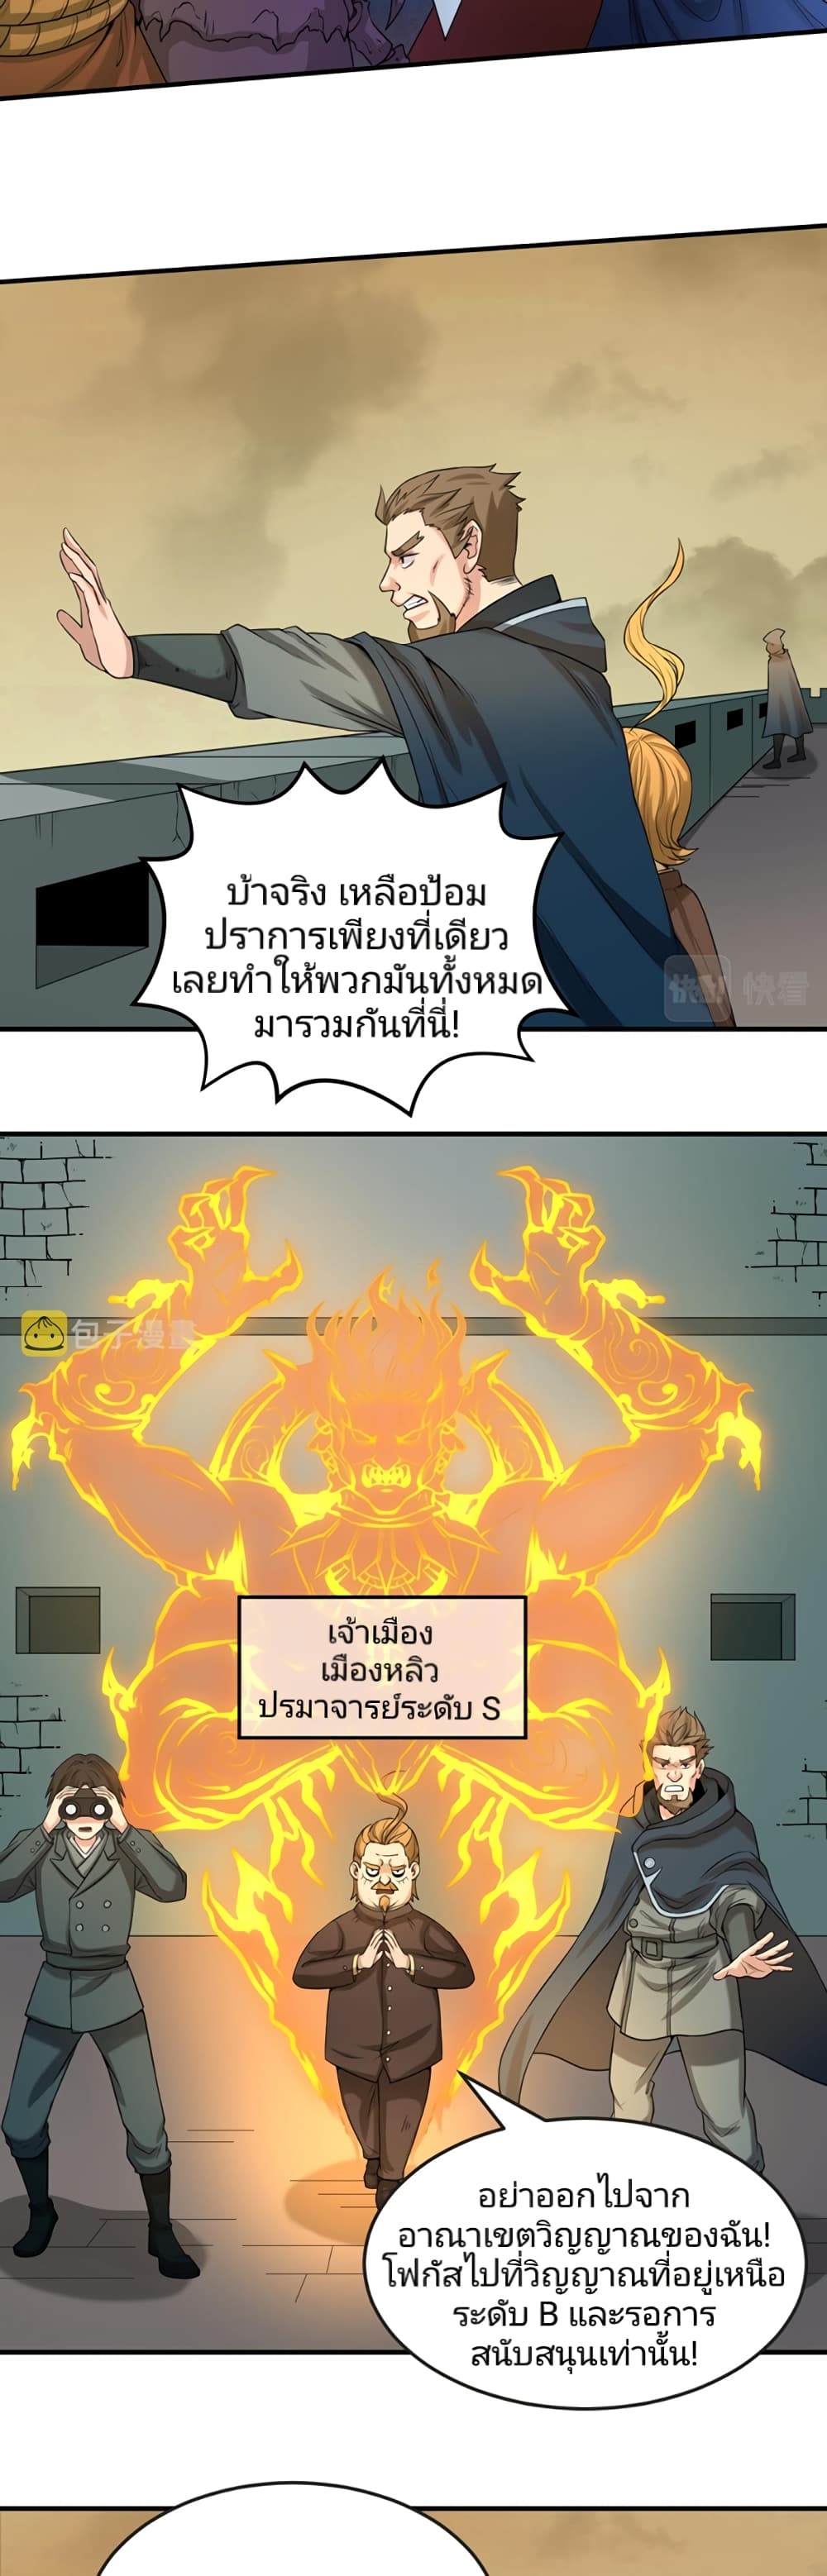 The Age of Ghost Spirits à¸à¸­à¸à¸à¸µà¹ 35 (18)